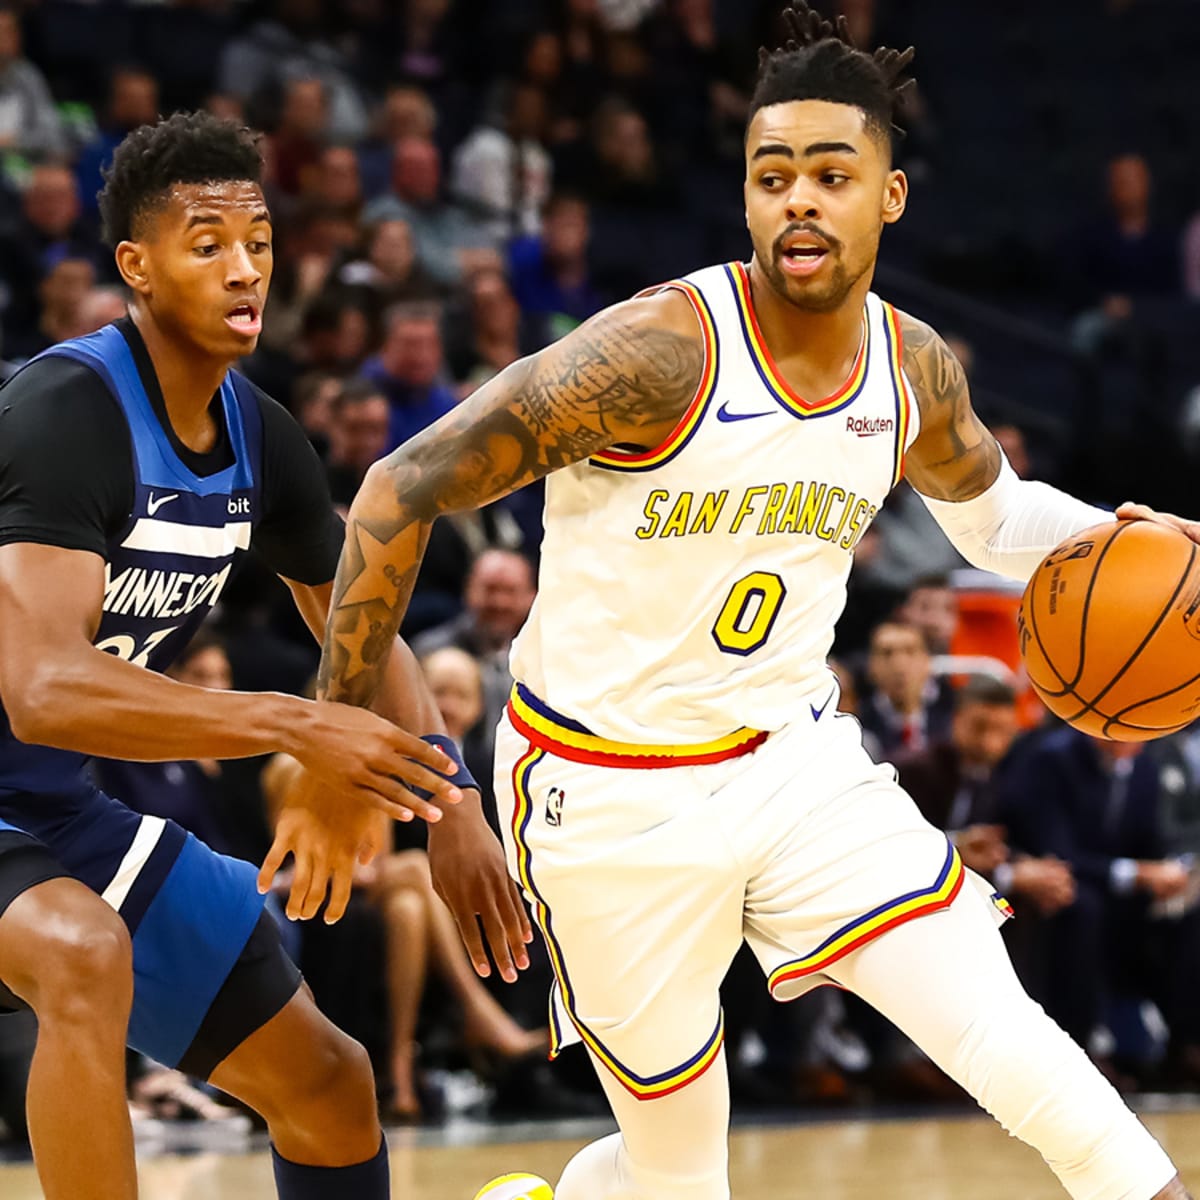 Rumor: Timberwolves' D'Angelo Russell expected to be shopped on trade market